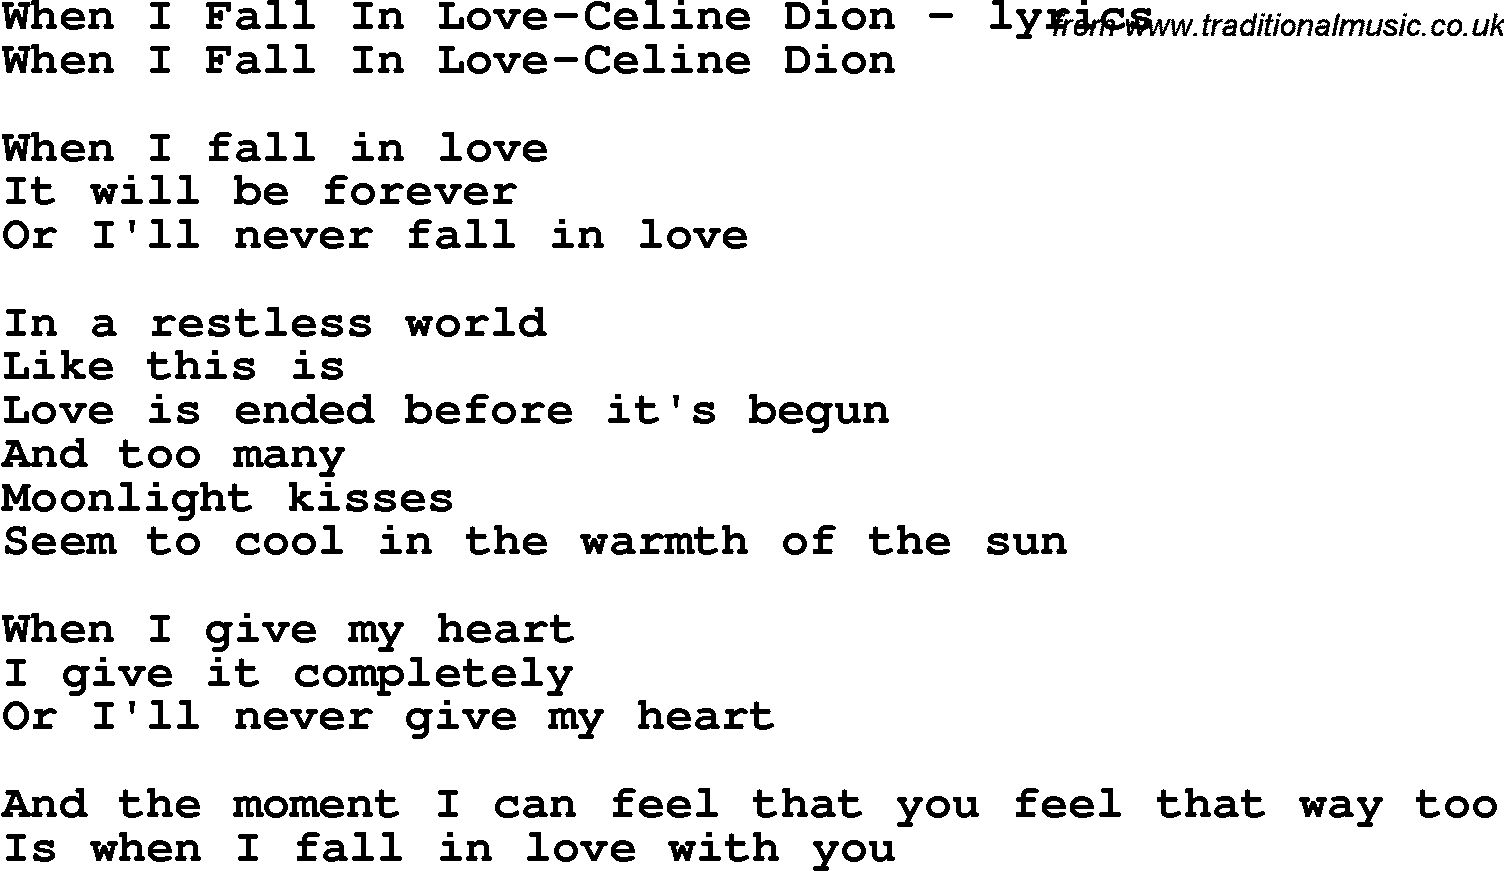 Love Song Lyrics for: When I Fall In Love-Celine Dion